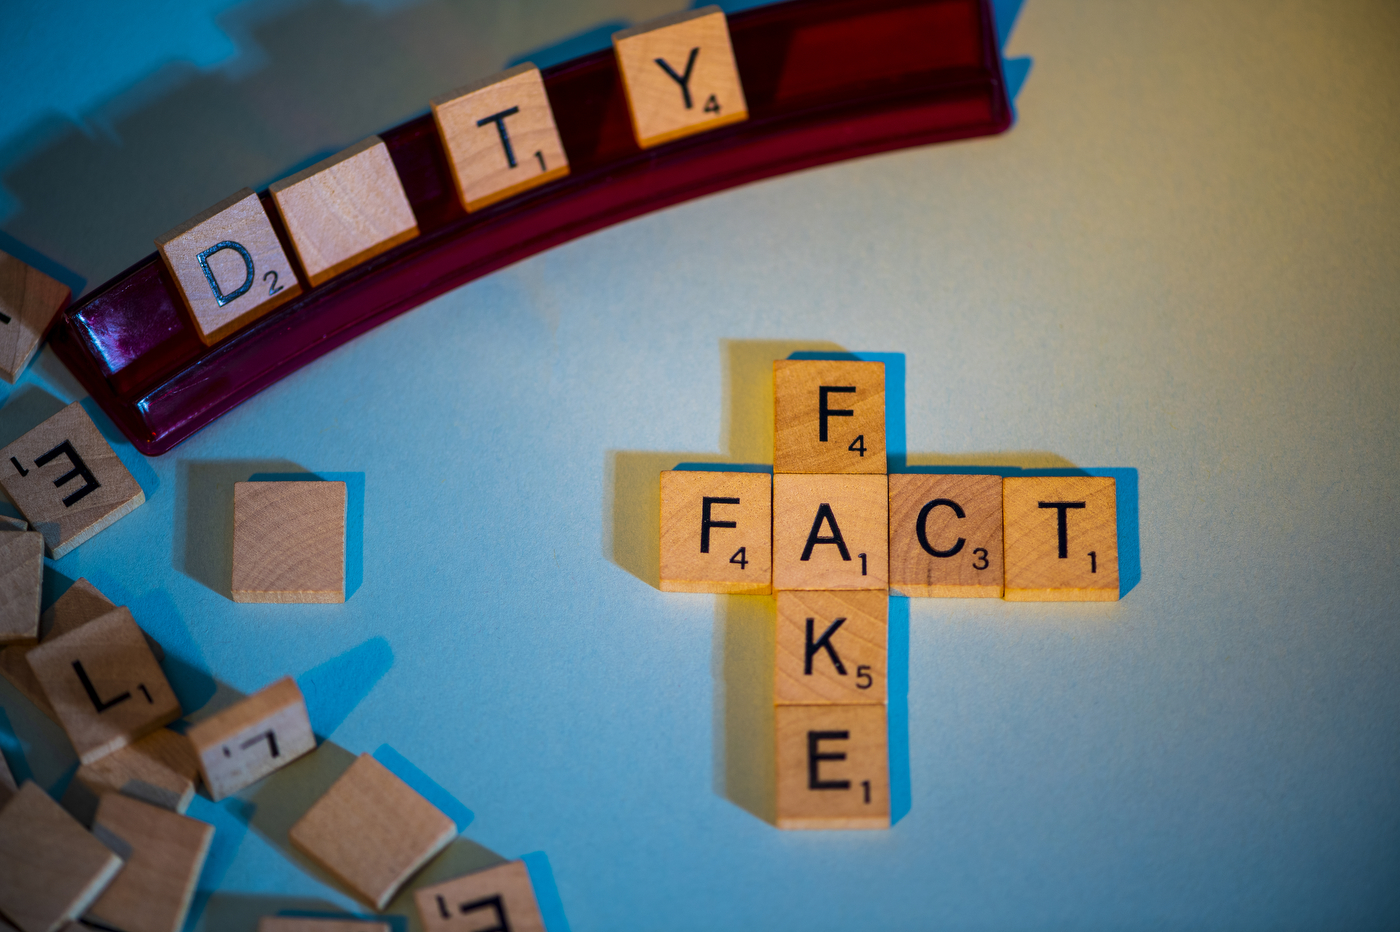 Scrabble letters spell out "fact" and "fake."